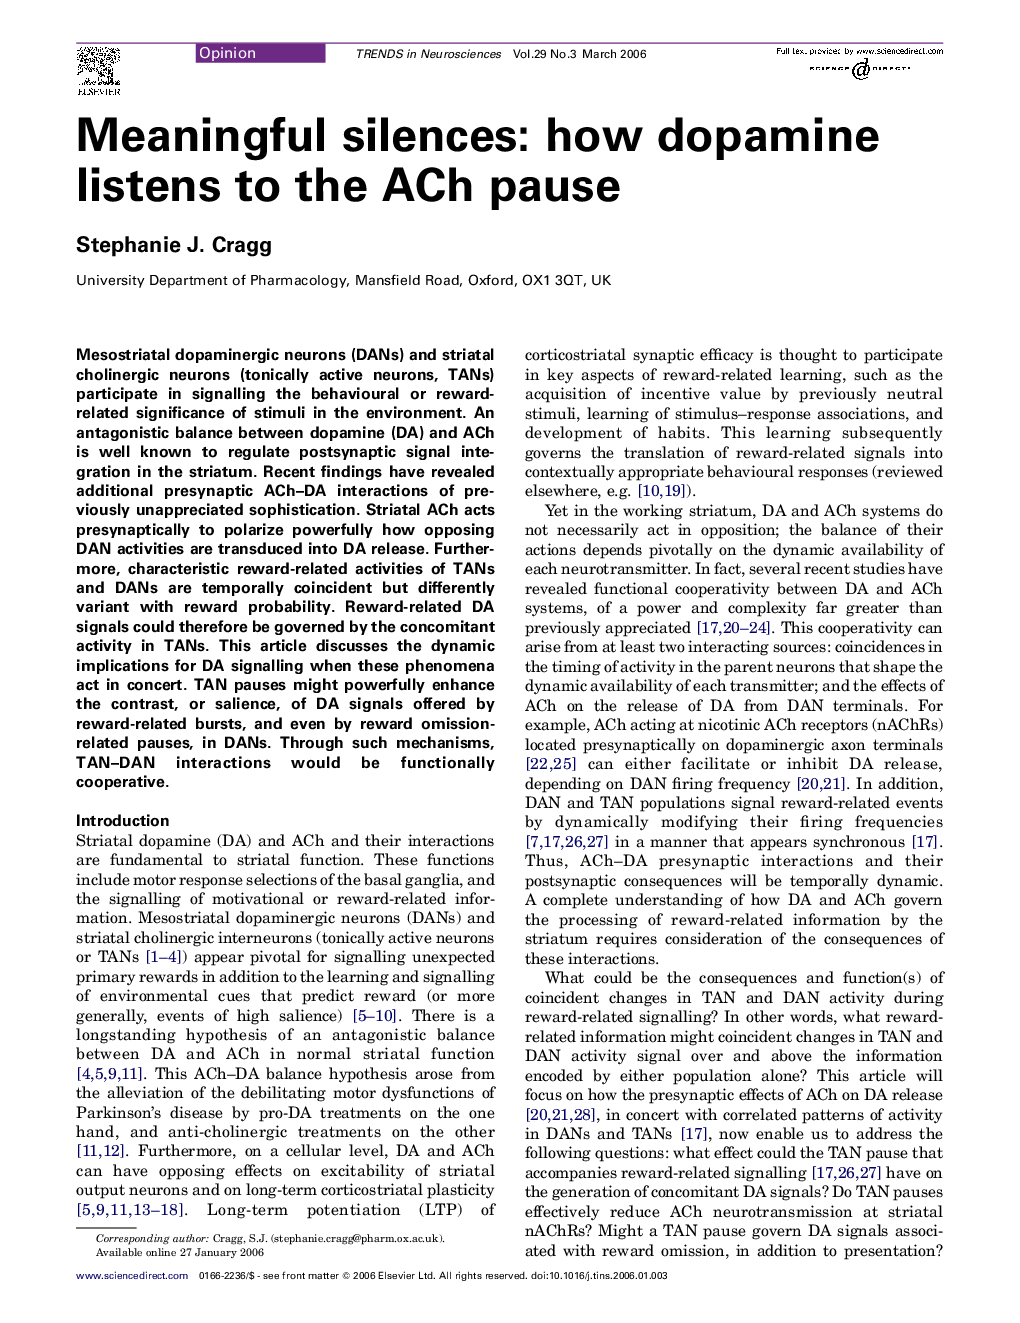 Meaningful silences: how dopamine listens to the ACh pause